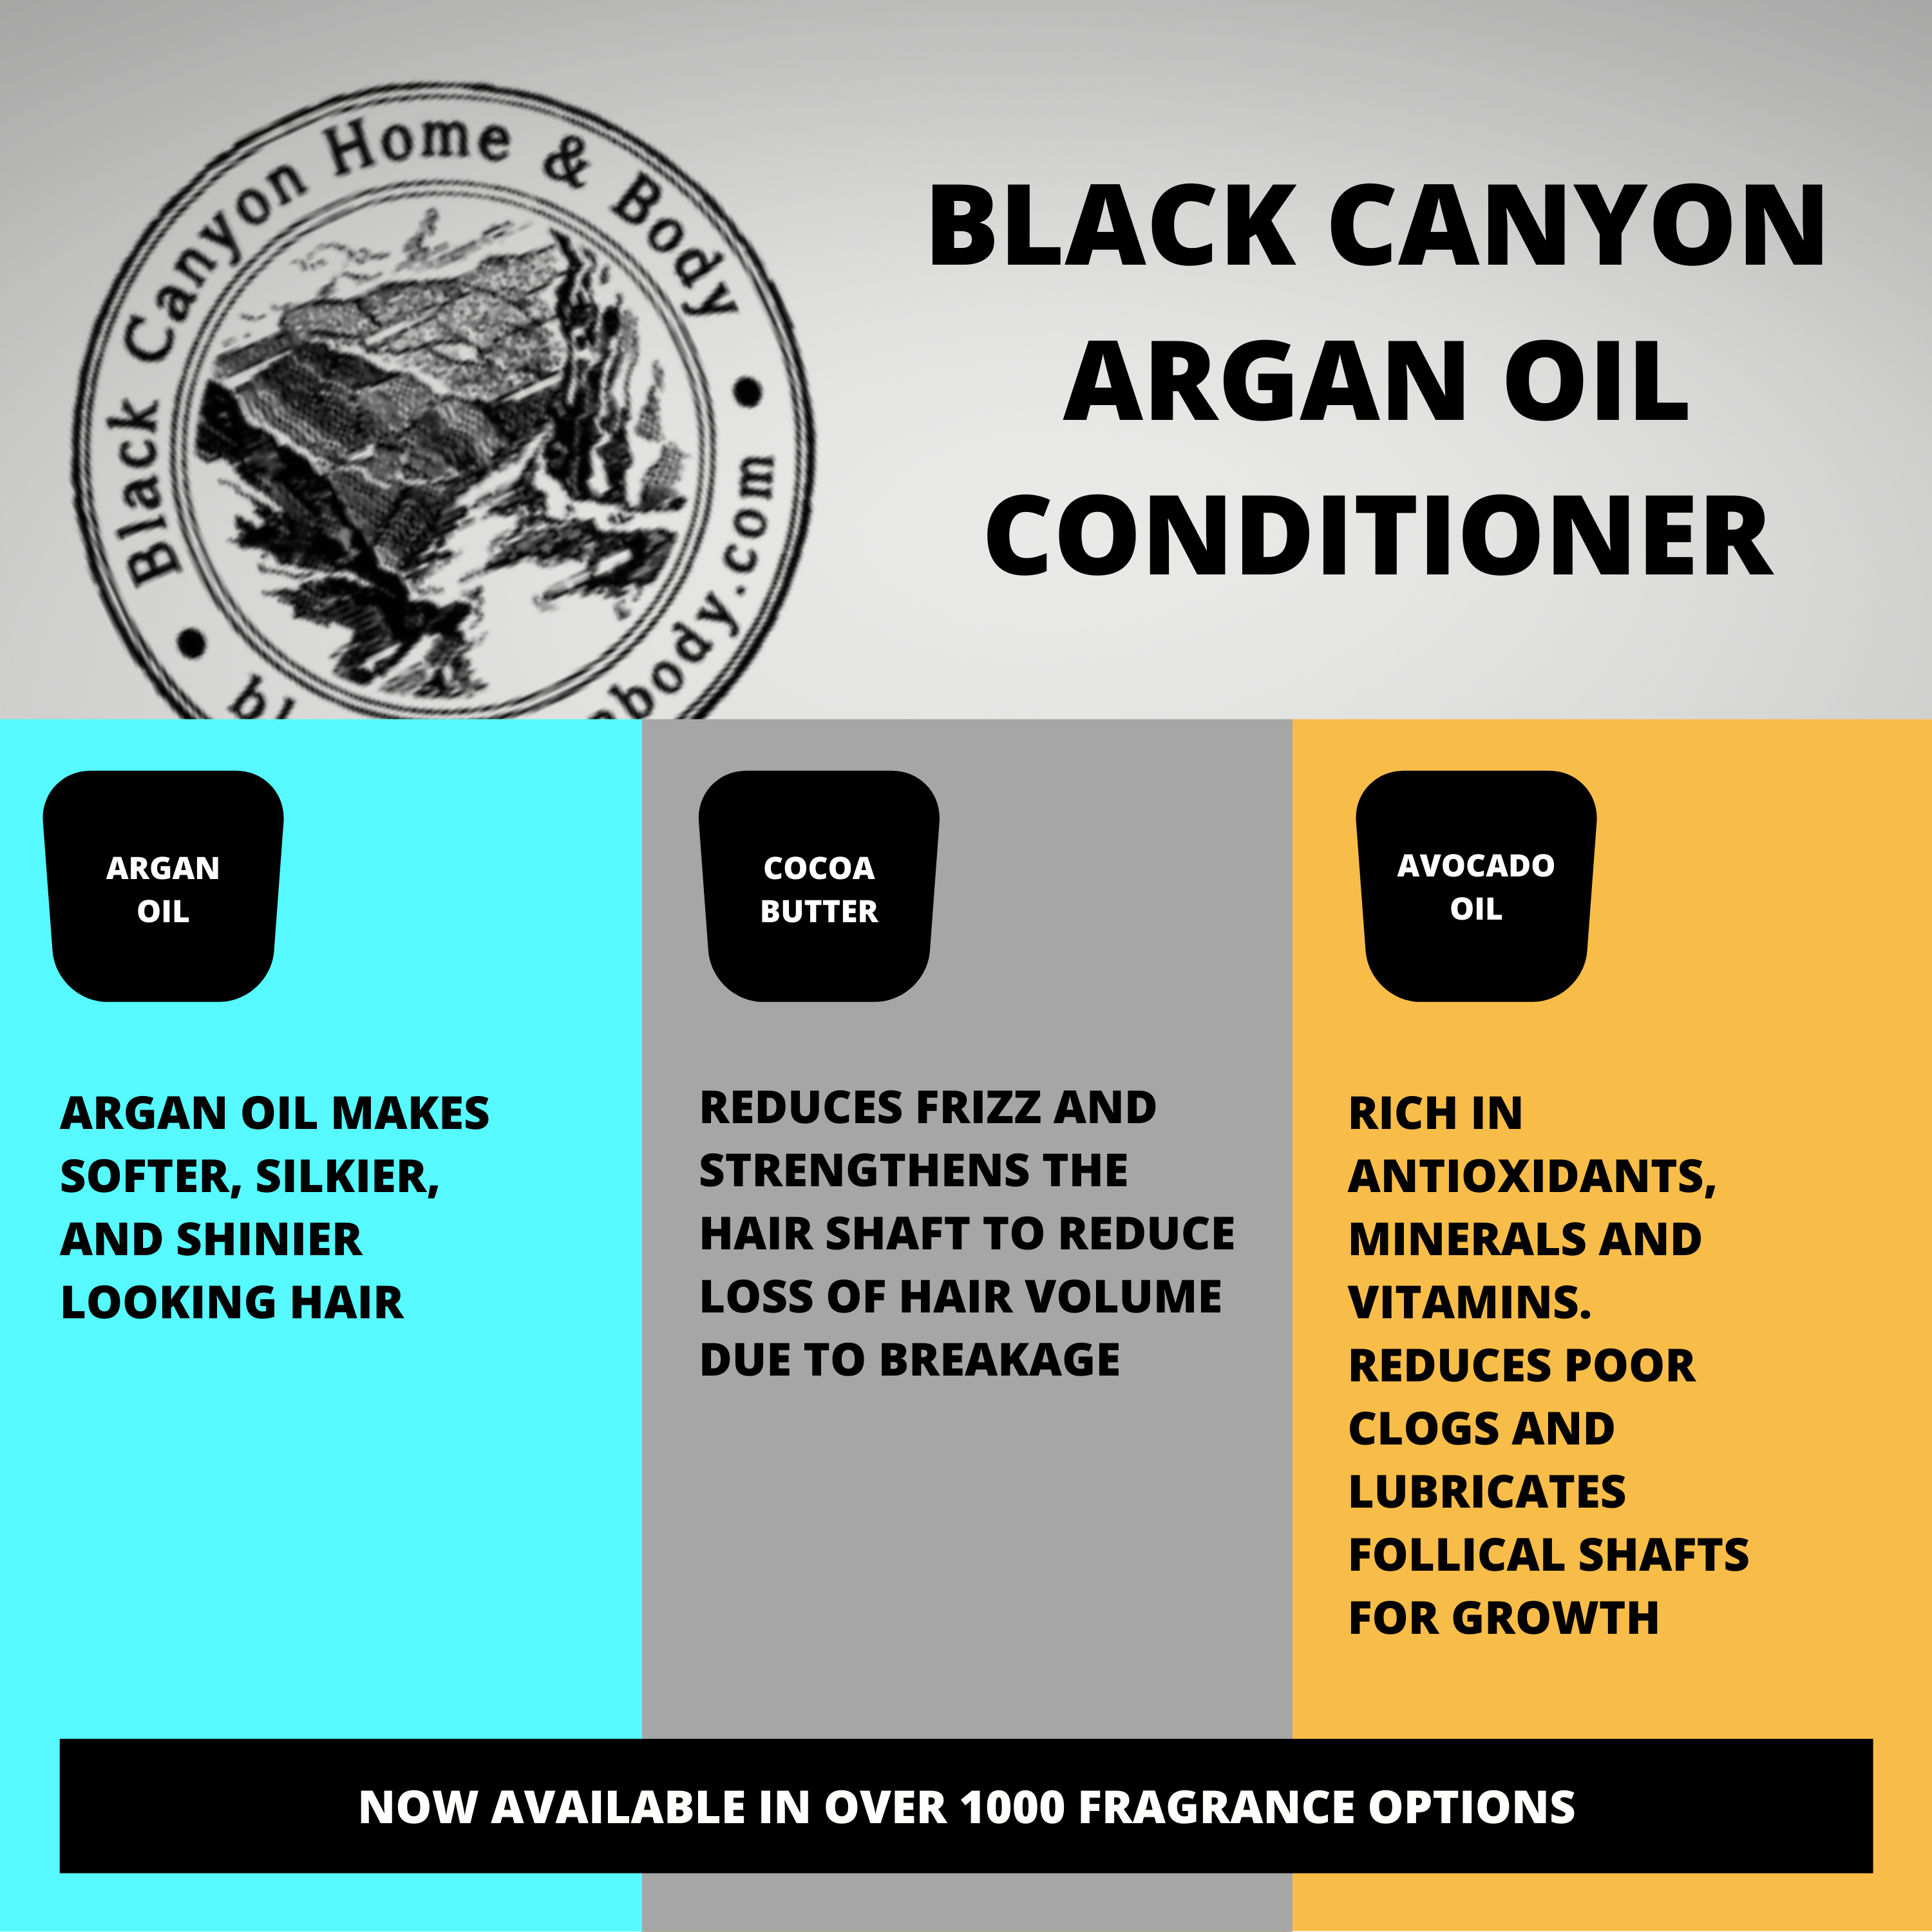 Black Canyon Blackberry Tangerine Scented Conditioner with Argan Oil